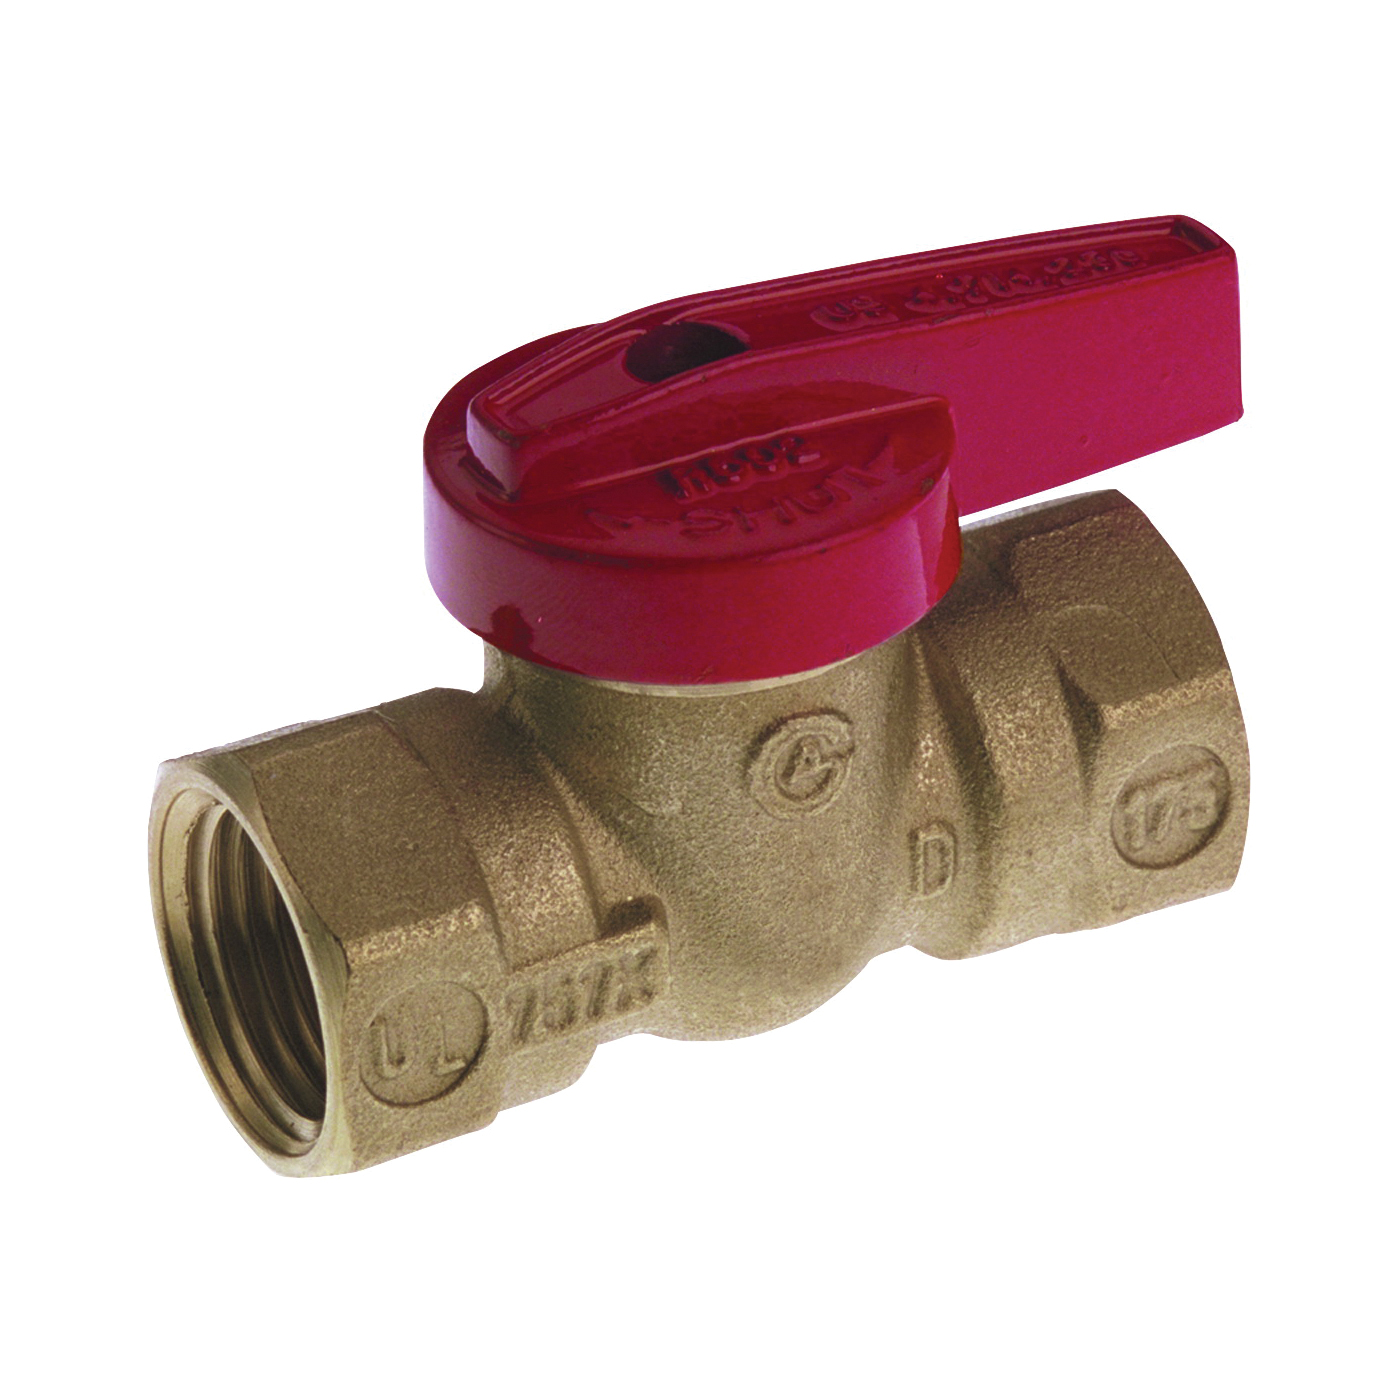 ProLine Series 110-523HC Gas Ball Valve, 1/2 in Connection, FPT, 200 psi Pressure, Manual Actuator, Brass Body